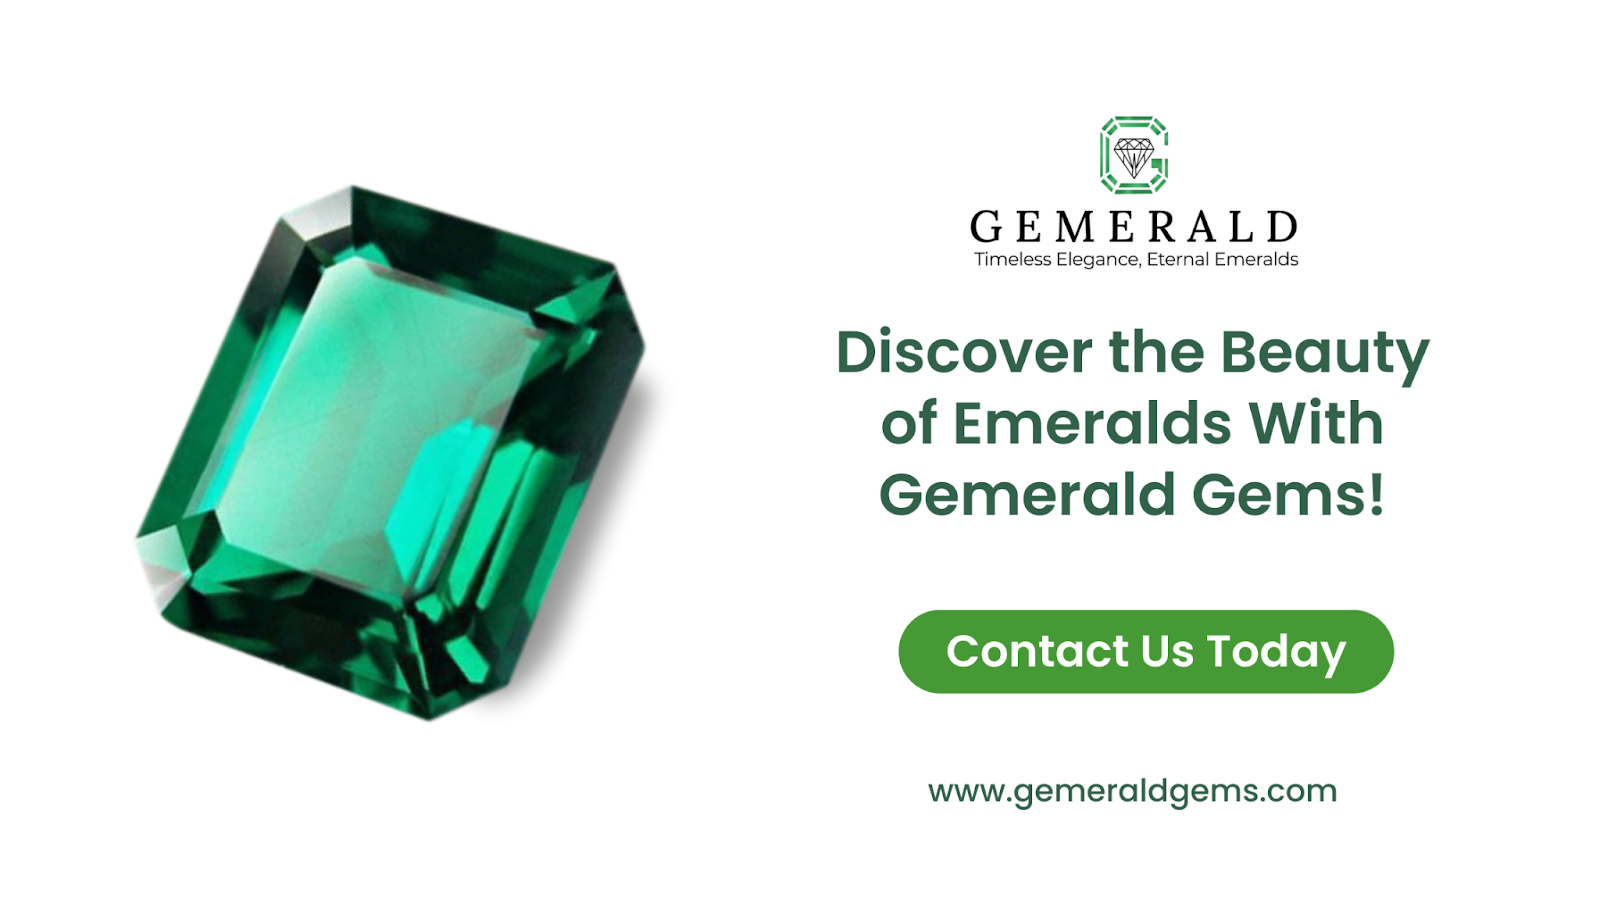 Discover the Beauty of Emeralds With Gemerald Gems!